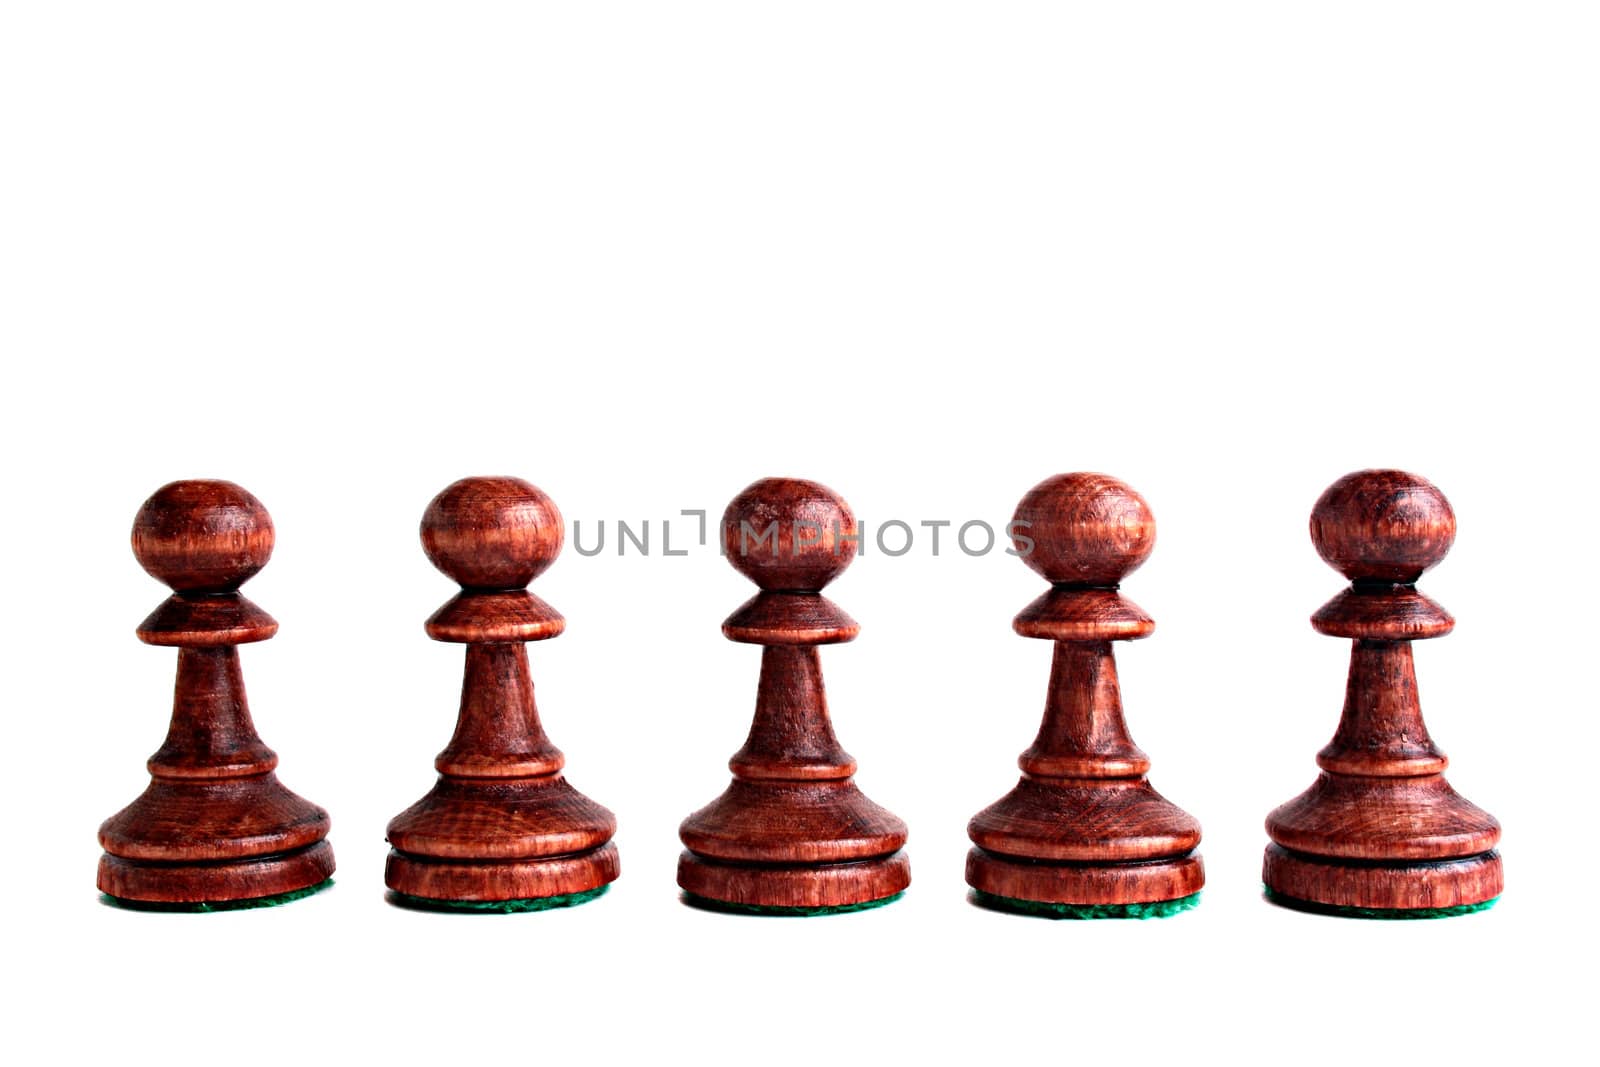 Five black pawns on a white background.